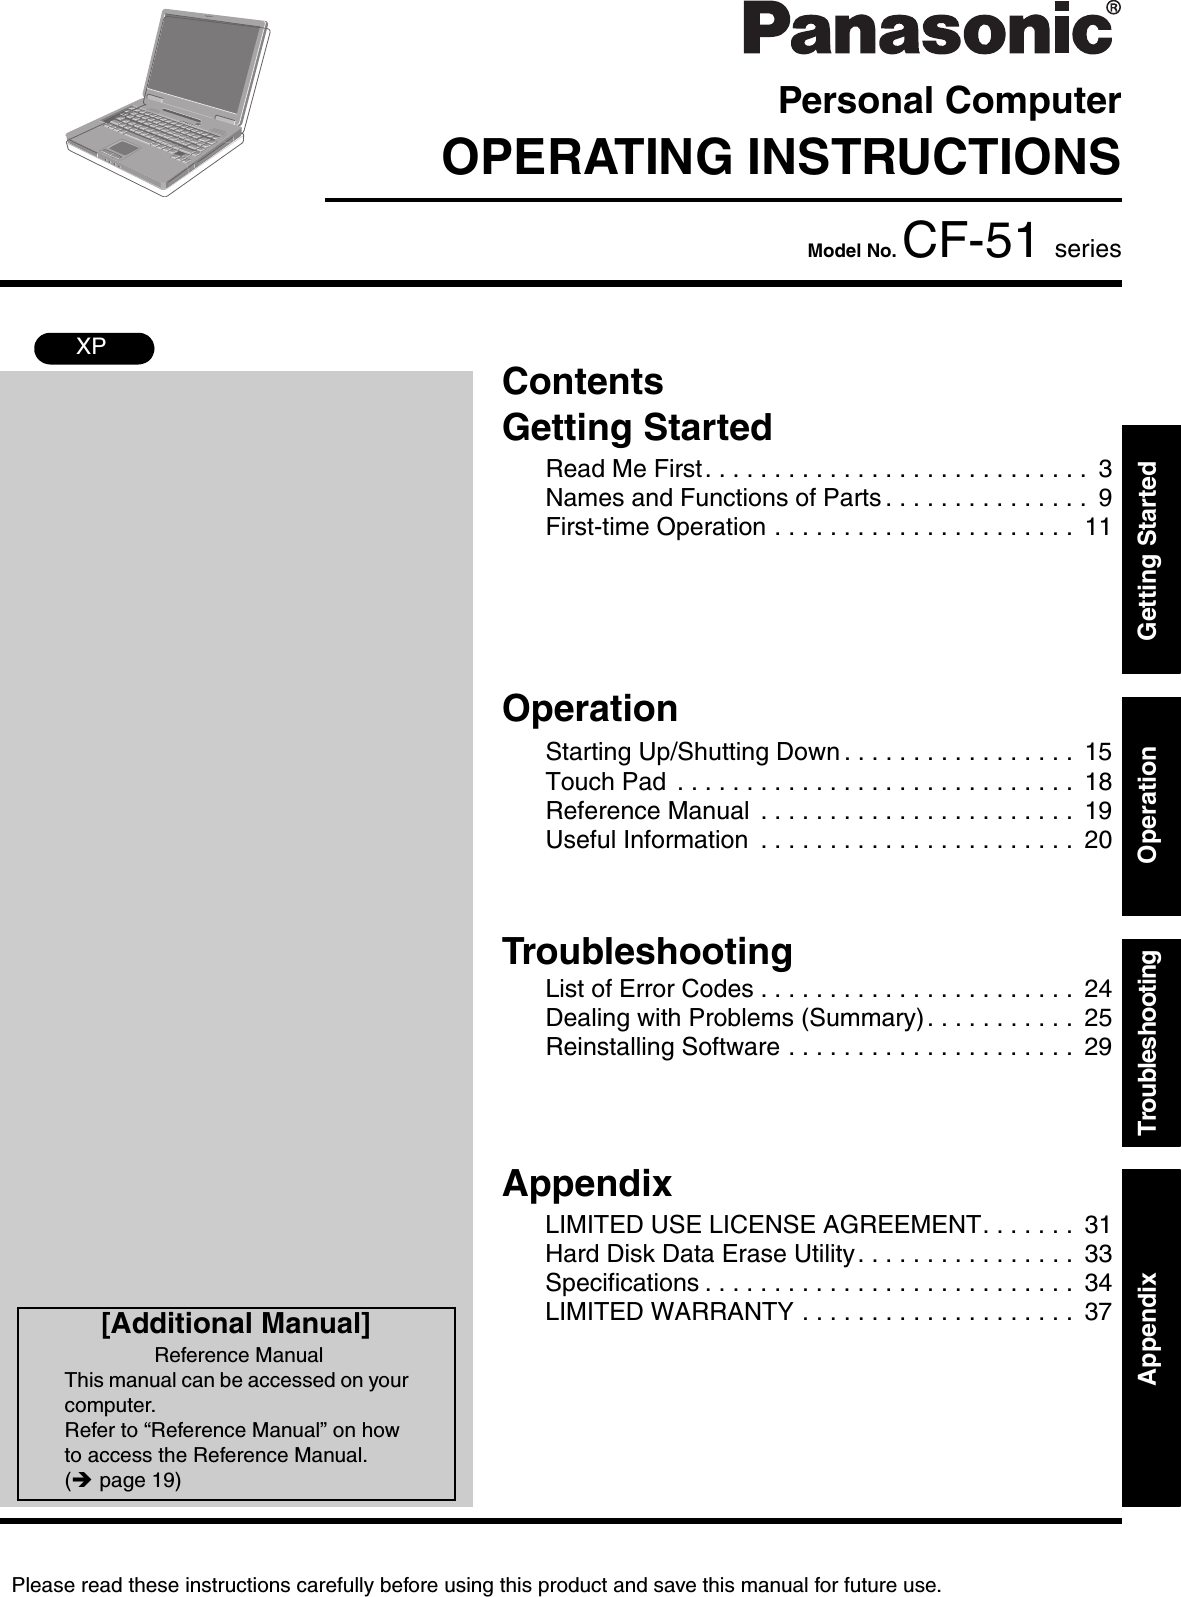 Please read these instructions carefully before using this product and save this manual for future use.ContentsGetting StartedOperationTroubleshootingGetting StartedOperationTroubleshootingAppendixAppendixPersonal ComputerOPERATING INSTRUCTIONSModel No. CF-51 seriesXP[Additional Manual]Reference ManualThis manual can be accessed on your computer.Refer to “Reference Manual” on how to access the Reference Manual. (Îpage 19)Read Me First. . . . . . . . . . . . . . . . . . . . . . . . . . . .  3Names and Functions of Parts . . . . . . . . . . . . . . .  9First-time Operation . . . . . . . . . . . . . . . . . . . . . .  11Starting Up/Shutting Down . . . . . . . . . . . . . . . . .  15Touch Pad  . . . . . . . . . . . . . . . . . . . . . . . . . . . . .  18Reference Manual  . . . . . . . . . . . . . . . . . . . . . . .  19Useful Information  . . . . . . . . . . . . . . . . . . . . . . .  20List of Error Codes . . . . . . . . . . . . . . . . . . . . . . .  24Dealing with Problems (Summary). . . . . . . . . . .  25Reinstalling Software . . . . . . . . . . . . . . . . . . . . .  29LIMITED USE LICENSE AGREEMENT. . . . . . .  31Hard Disk Data Erase Utility. . . . . . . . . . . . . . . .  33Specifications . . . . . . . . . . . . . . . . . . . . . . . . . . .  34LIMITED WARRANTY . . . . . . . . . . . . . . . . . . . .  37